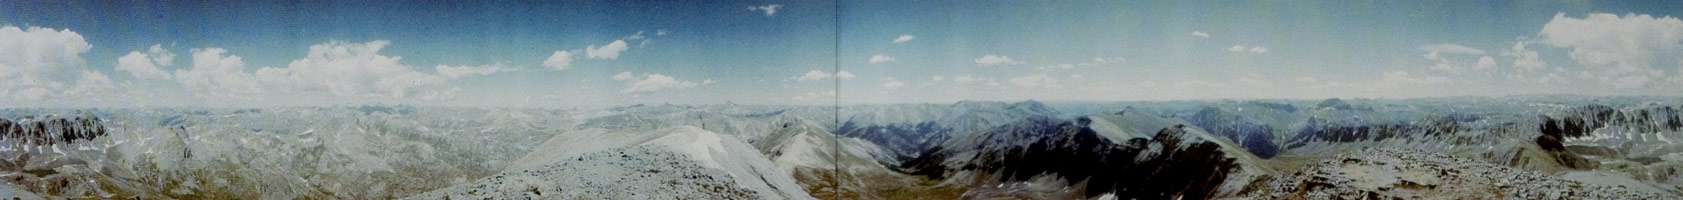 Gus Foster, Panoramic Photographs announcement 1982